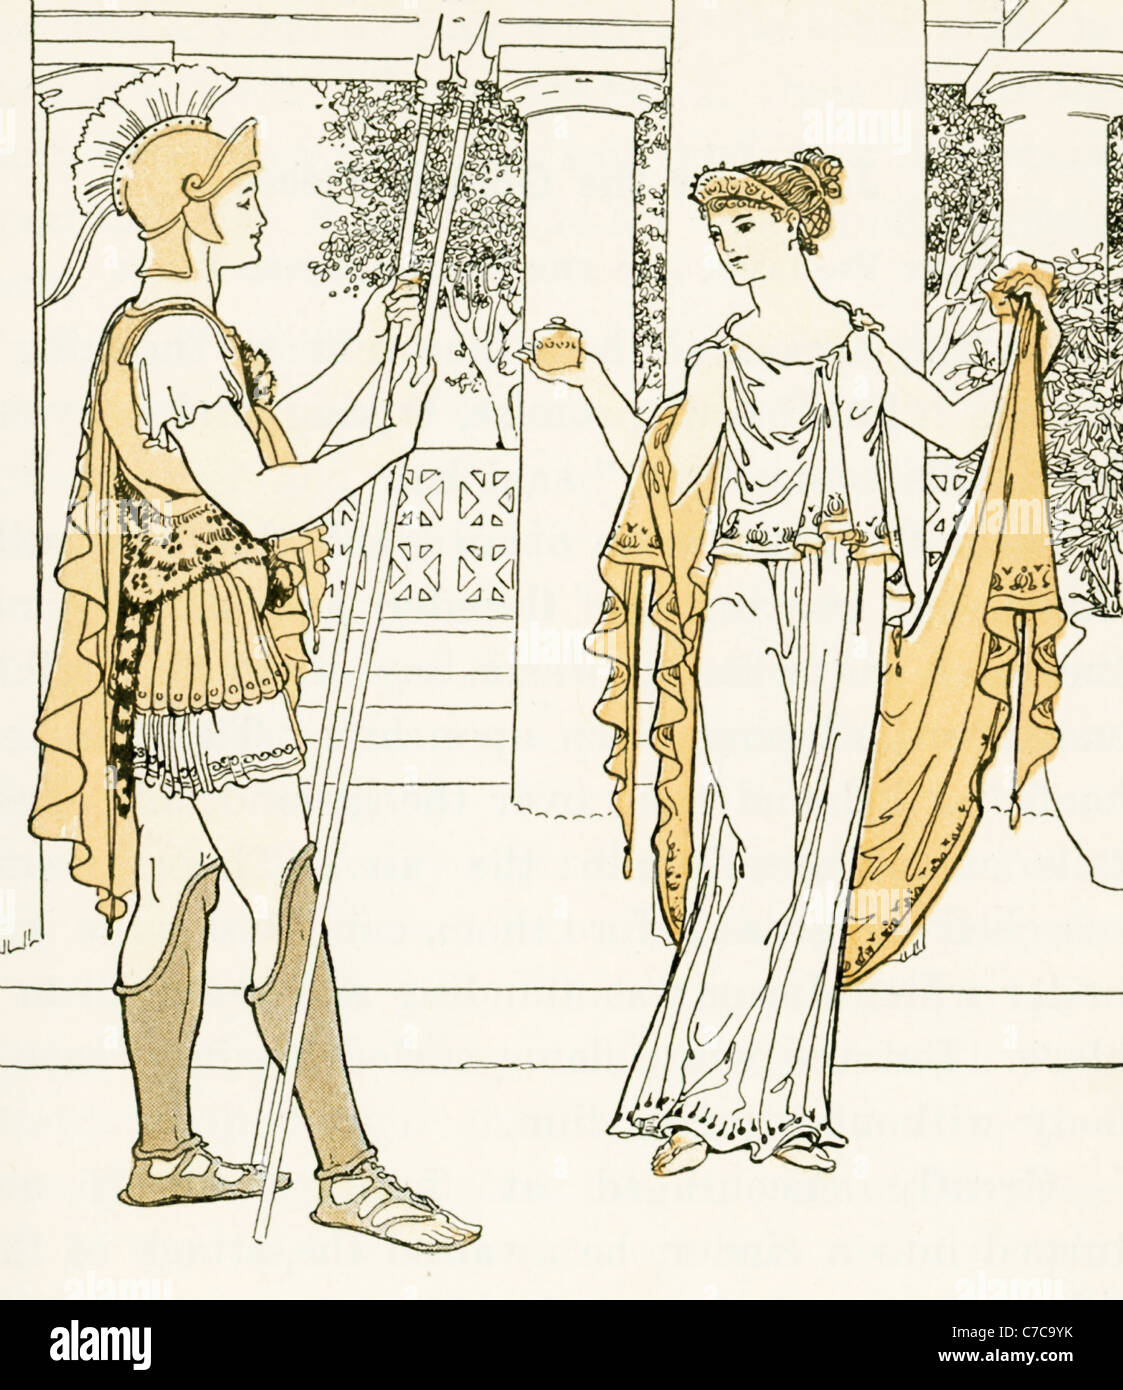 With the aid of Medea, the daughter of Aeetes, the king of Colchis, Jason snatched the Golden Fleece. Stock Photo